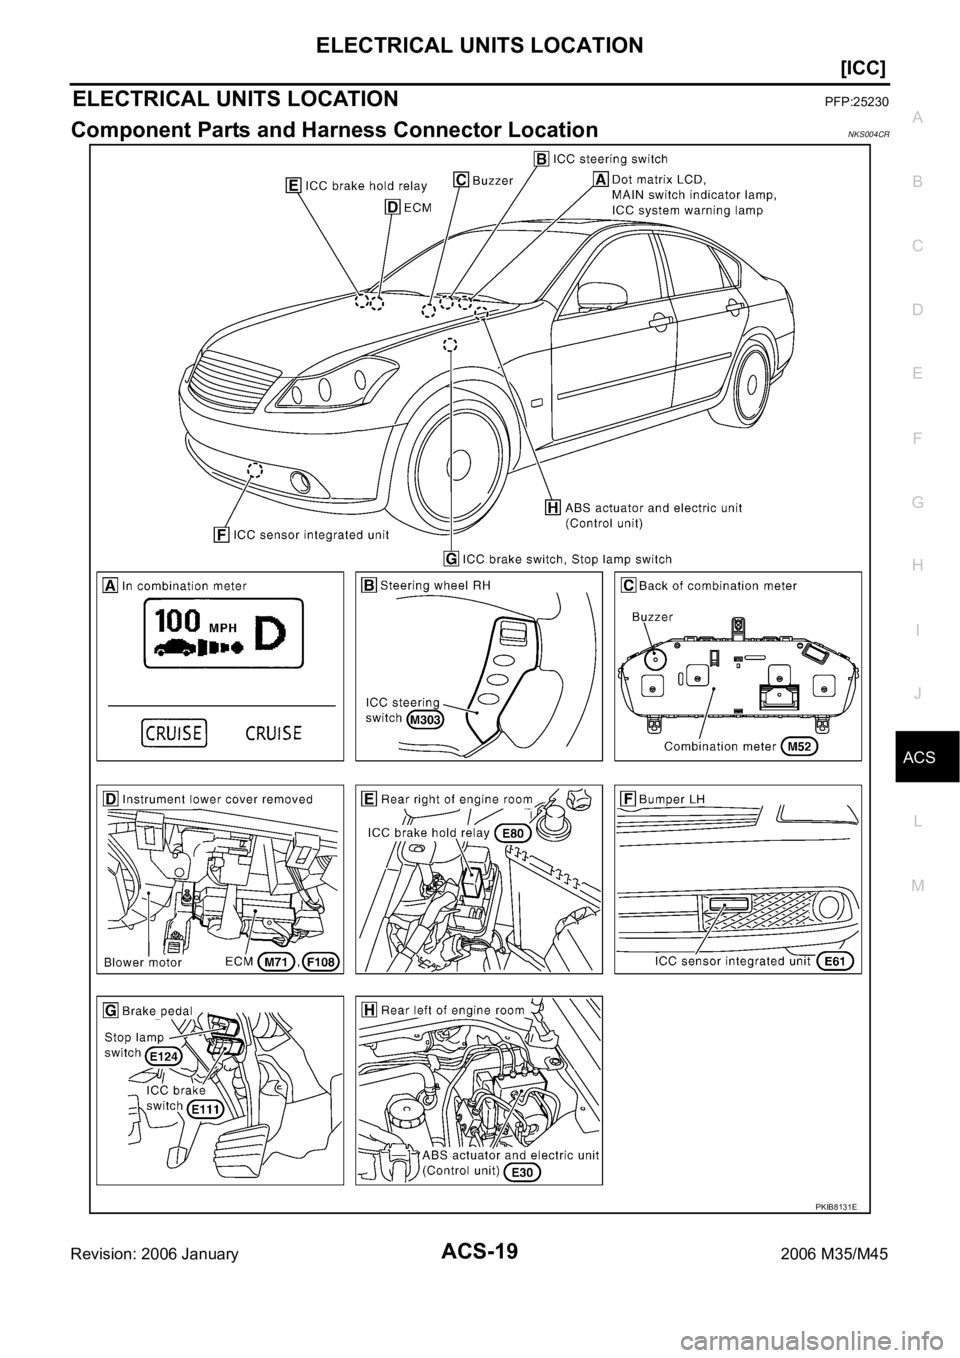 INFINITI M35 2006  Factory Owners Manual ELECTRICAL UNITS LOCATION
ACS-19
[ICC]
C
D
E
F
G
H
I
J
L
MA
B
ACS
Revision: 2006 January2006 M35/M45
ELECTRICAL UNITS LOCATIONPFP:25230
Component Parts and Harness Connector LocationNKS004CR
PKIB8131E